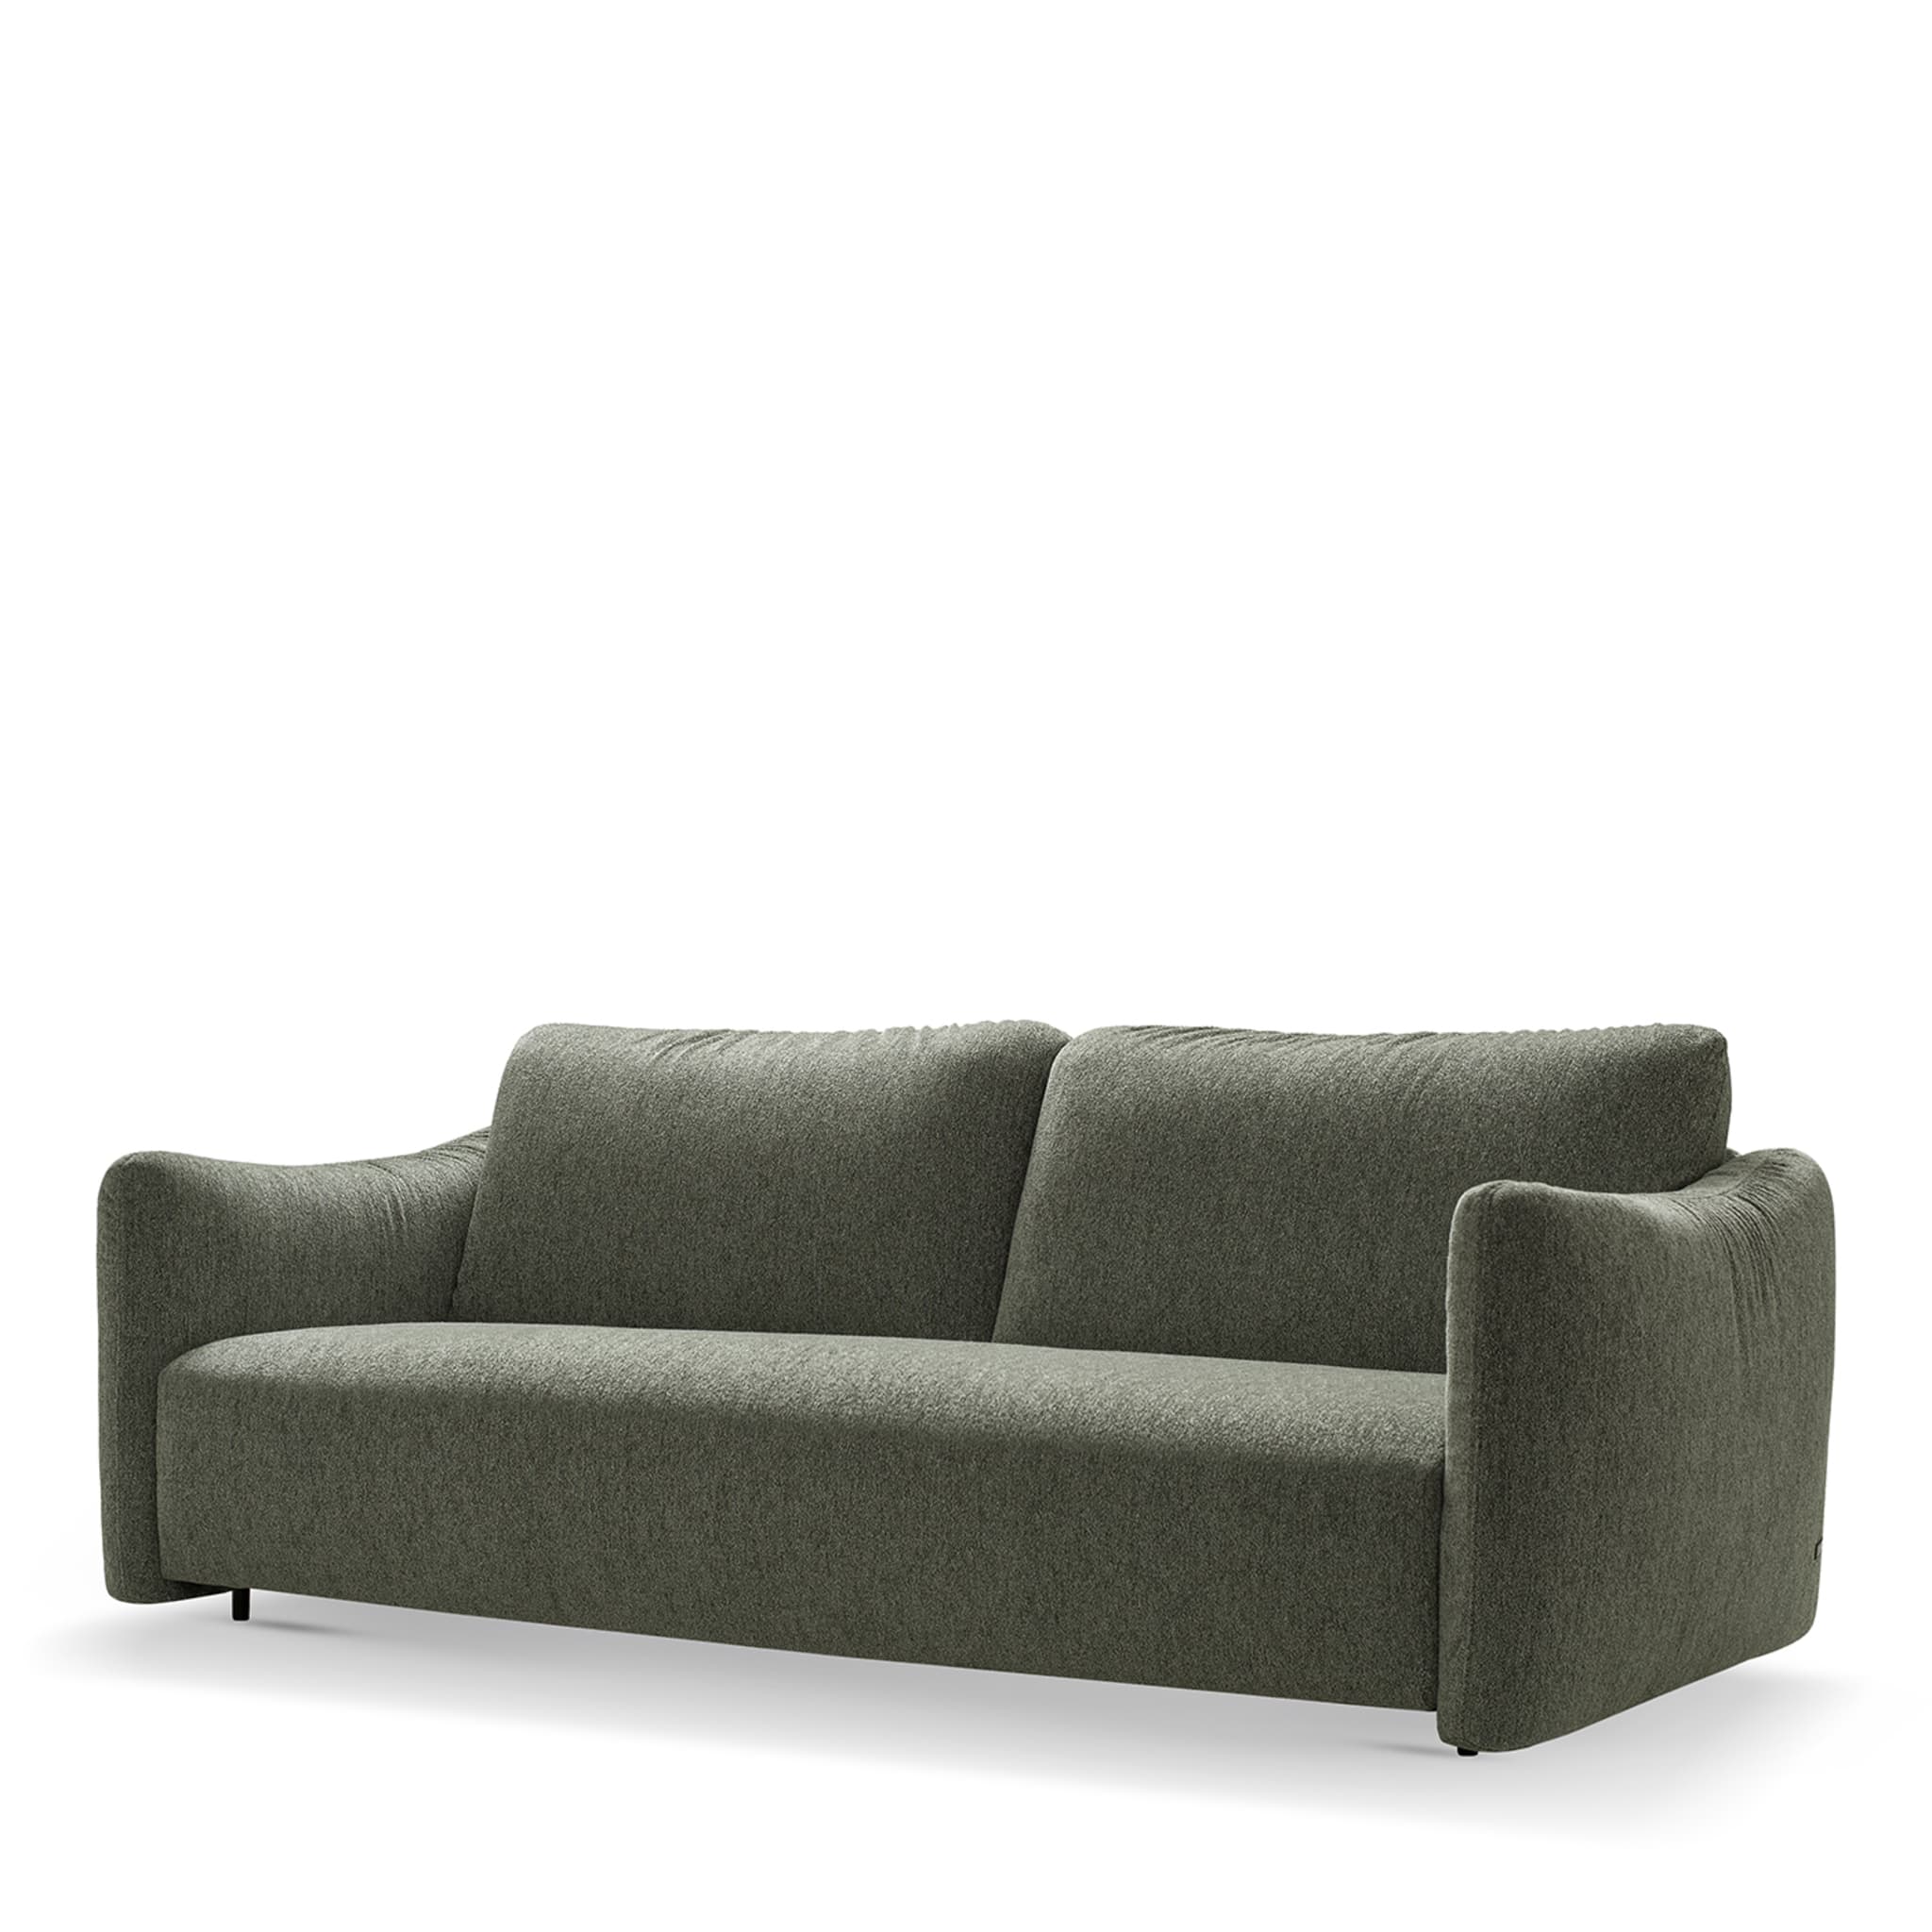 Olivier Green Sofa Bed - Alternative view 1